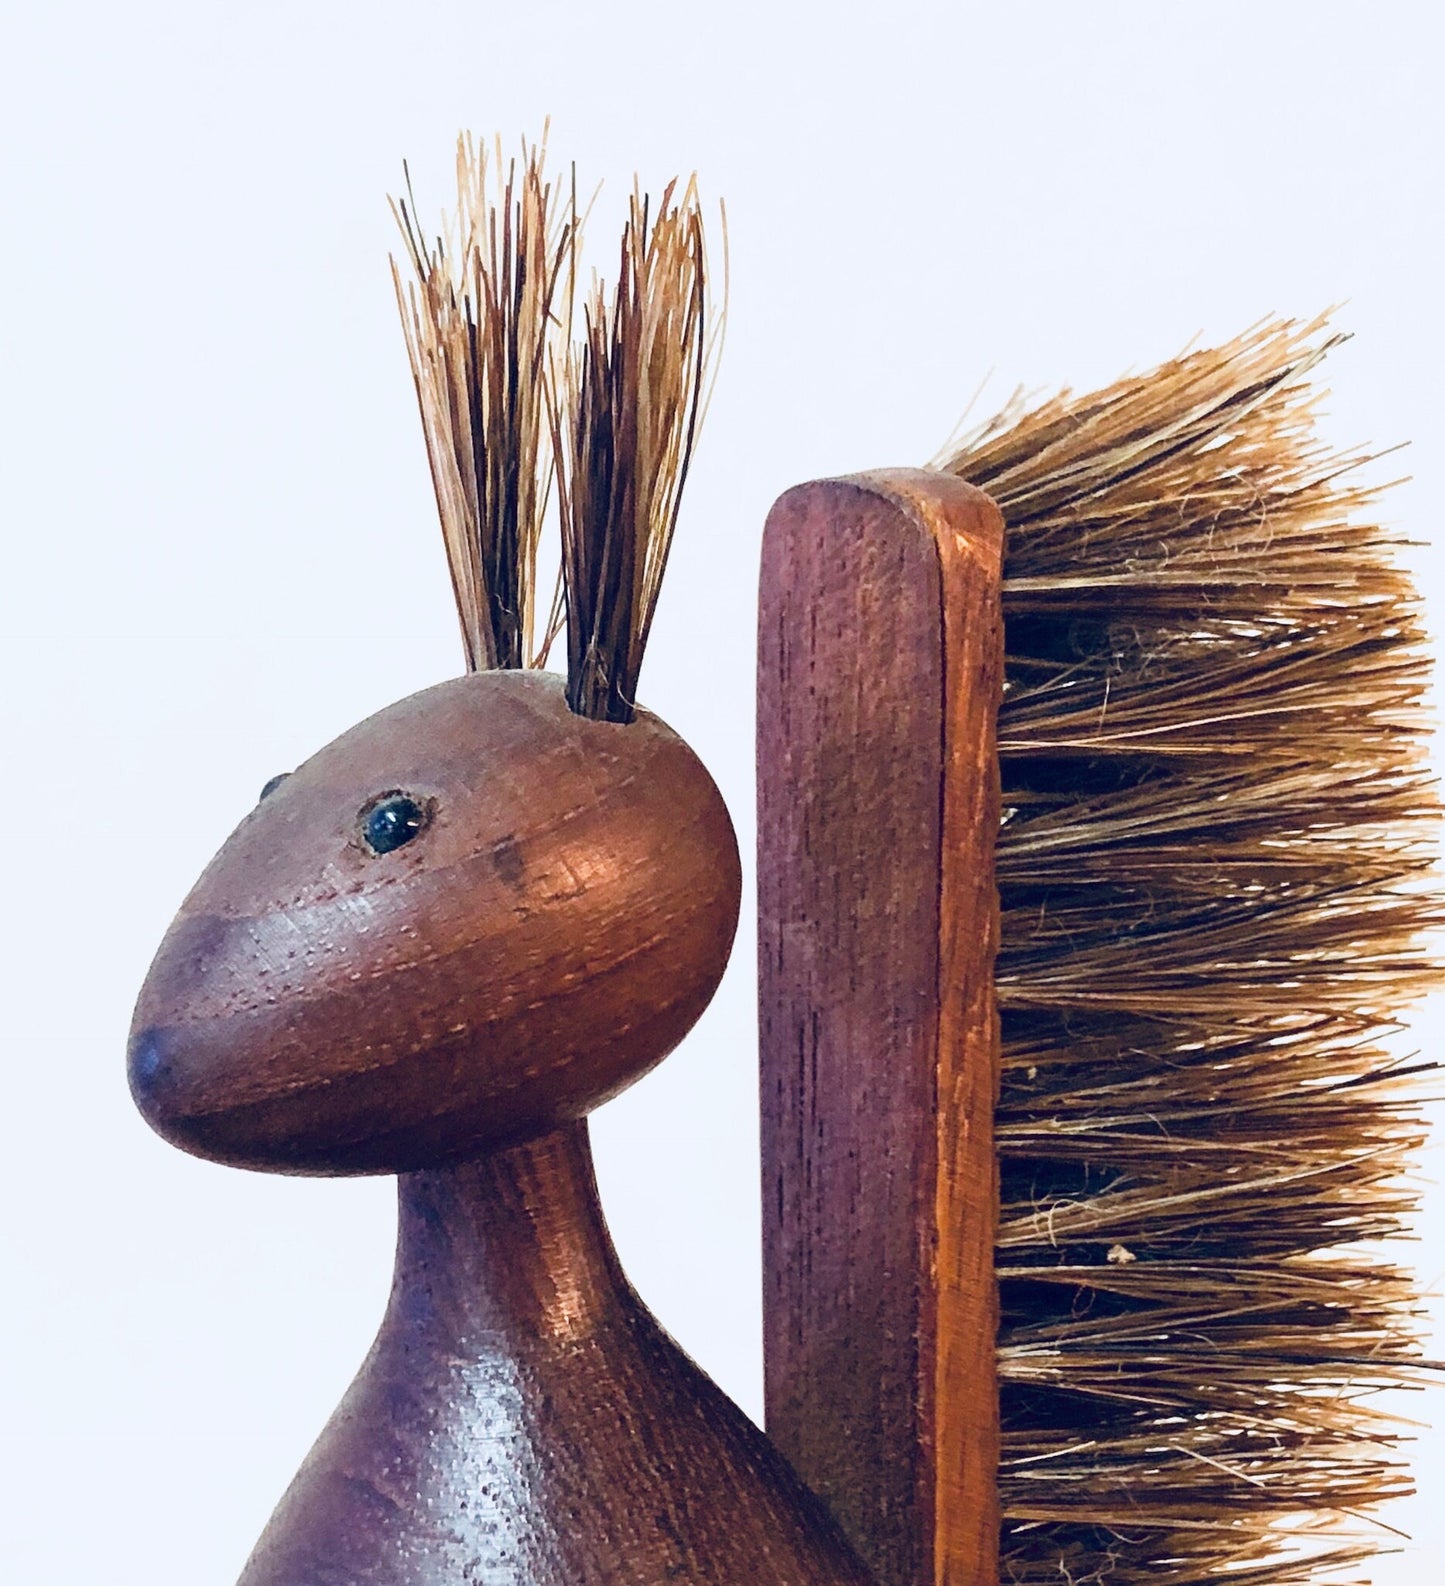 Wooden scrub brush with bristles resembling a cute squirrel, made of carved brown wood, vintage rustic home decor item